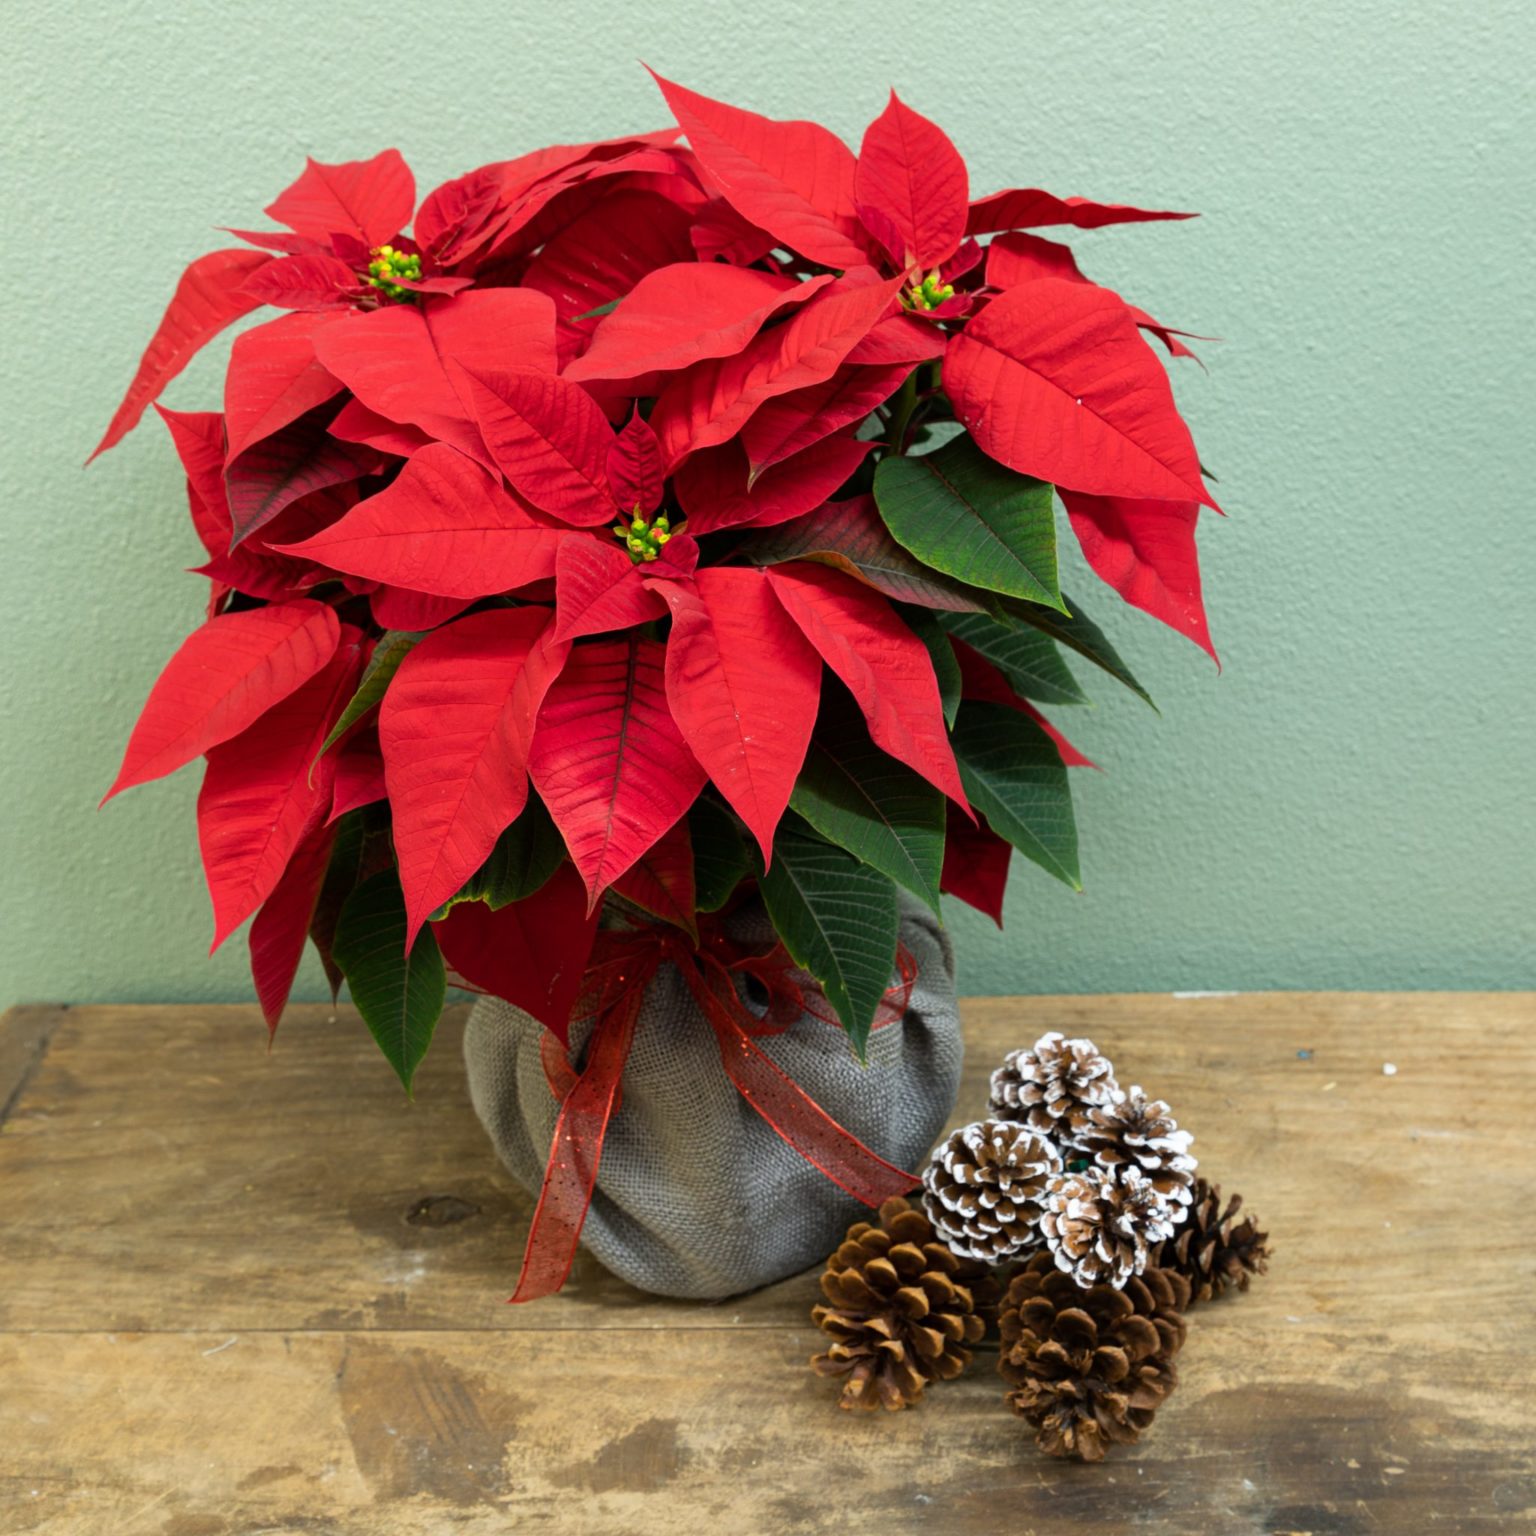 The legends and stories behind popular Christmas plants